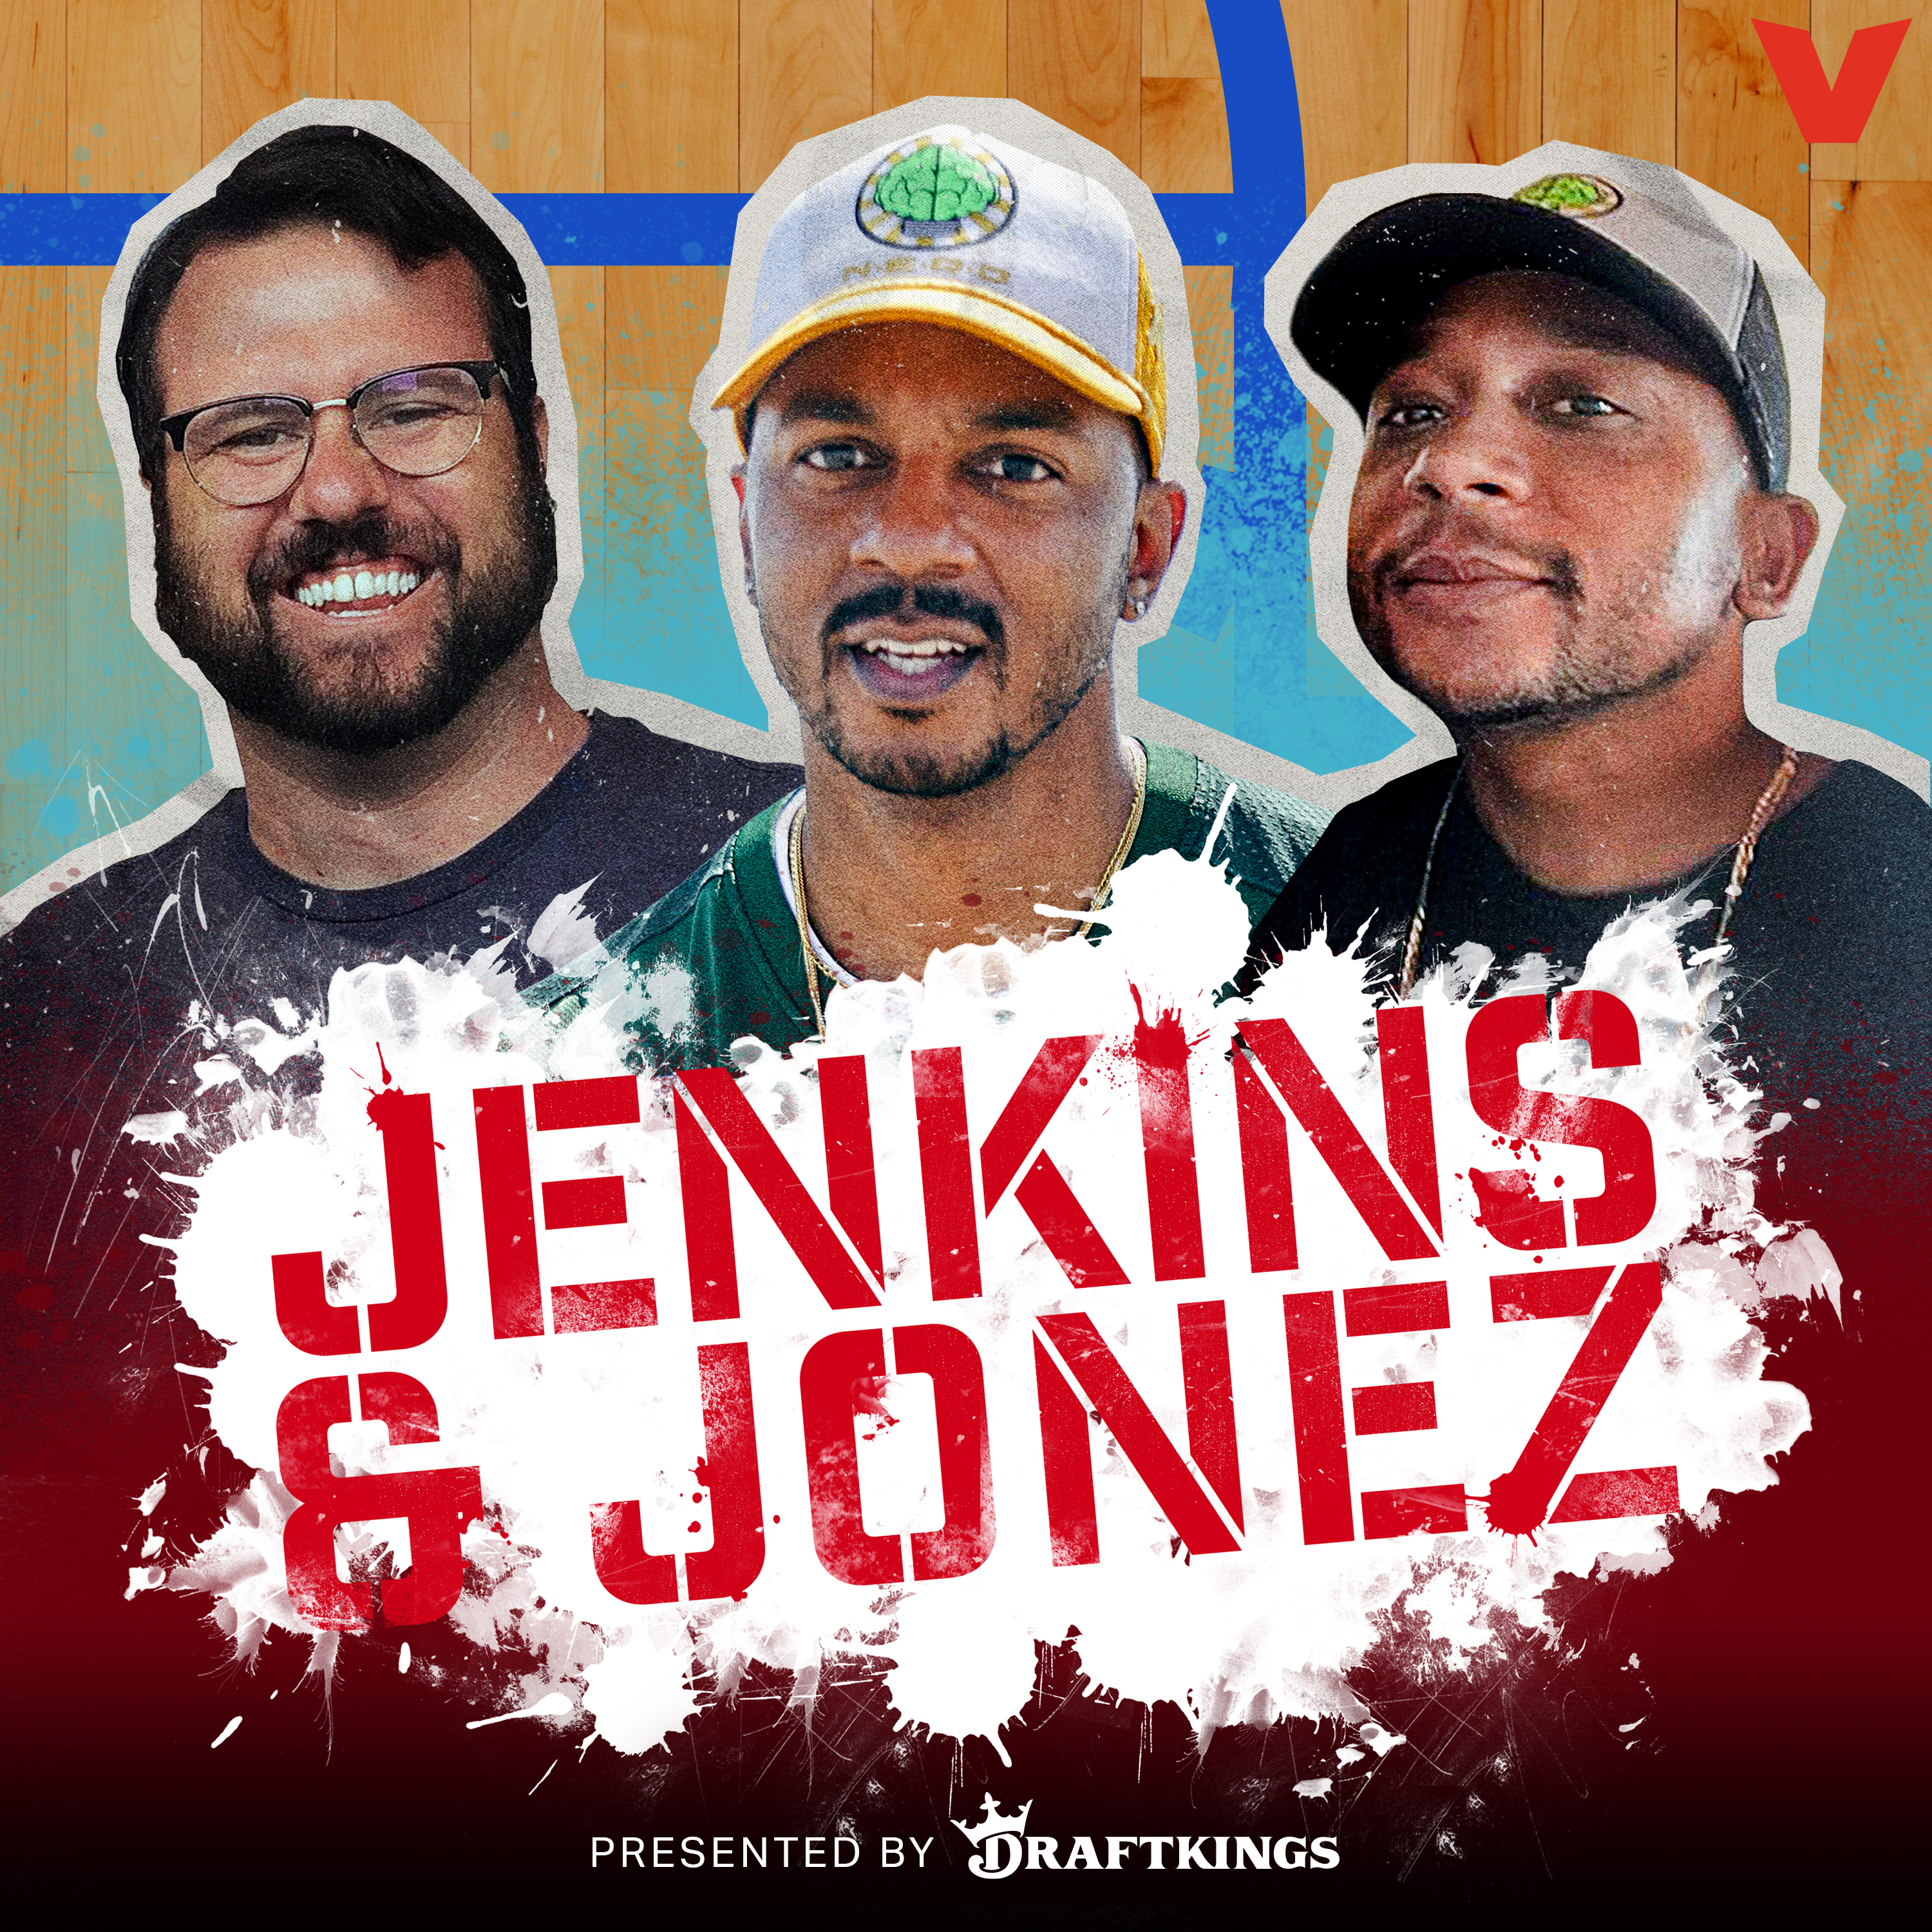 Jenkins and Jonez - Throwing Stars, Golf, and Dookie Butts